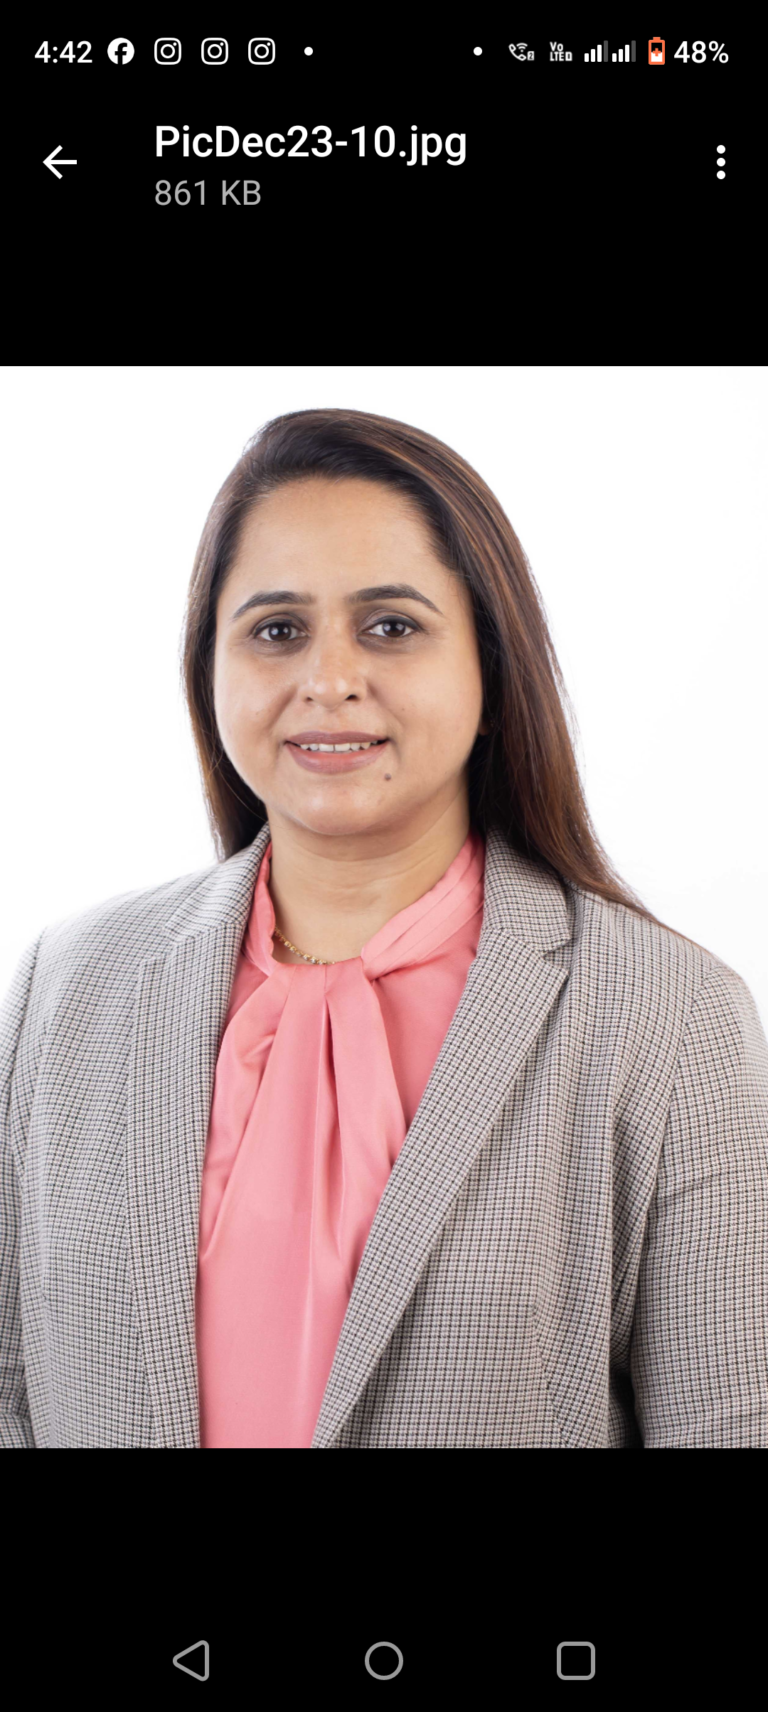 Shweta Rai to take over as Managing Director of Bayer Zydus Pharma Private Limited